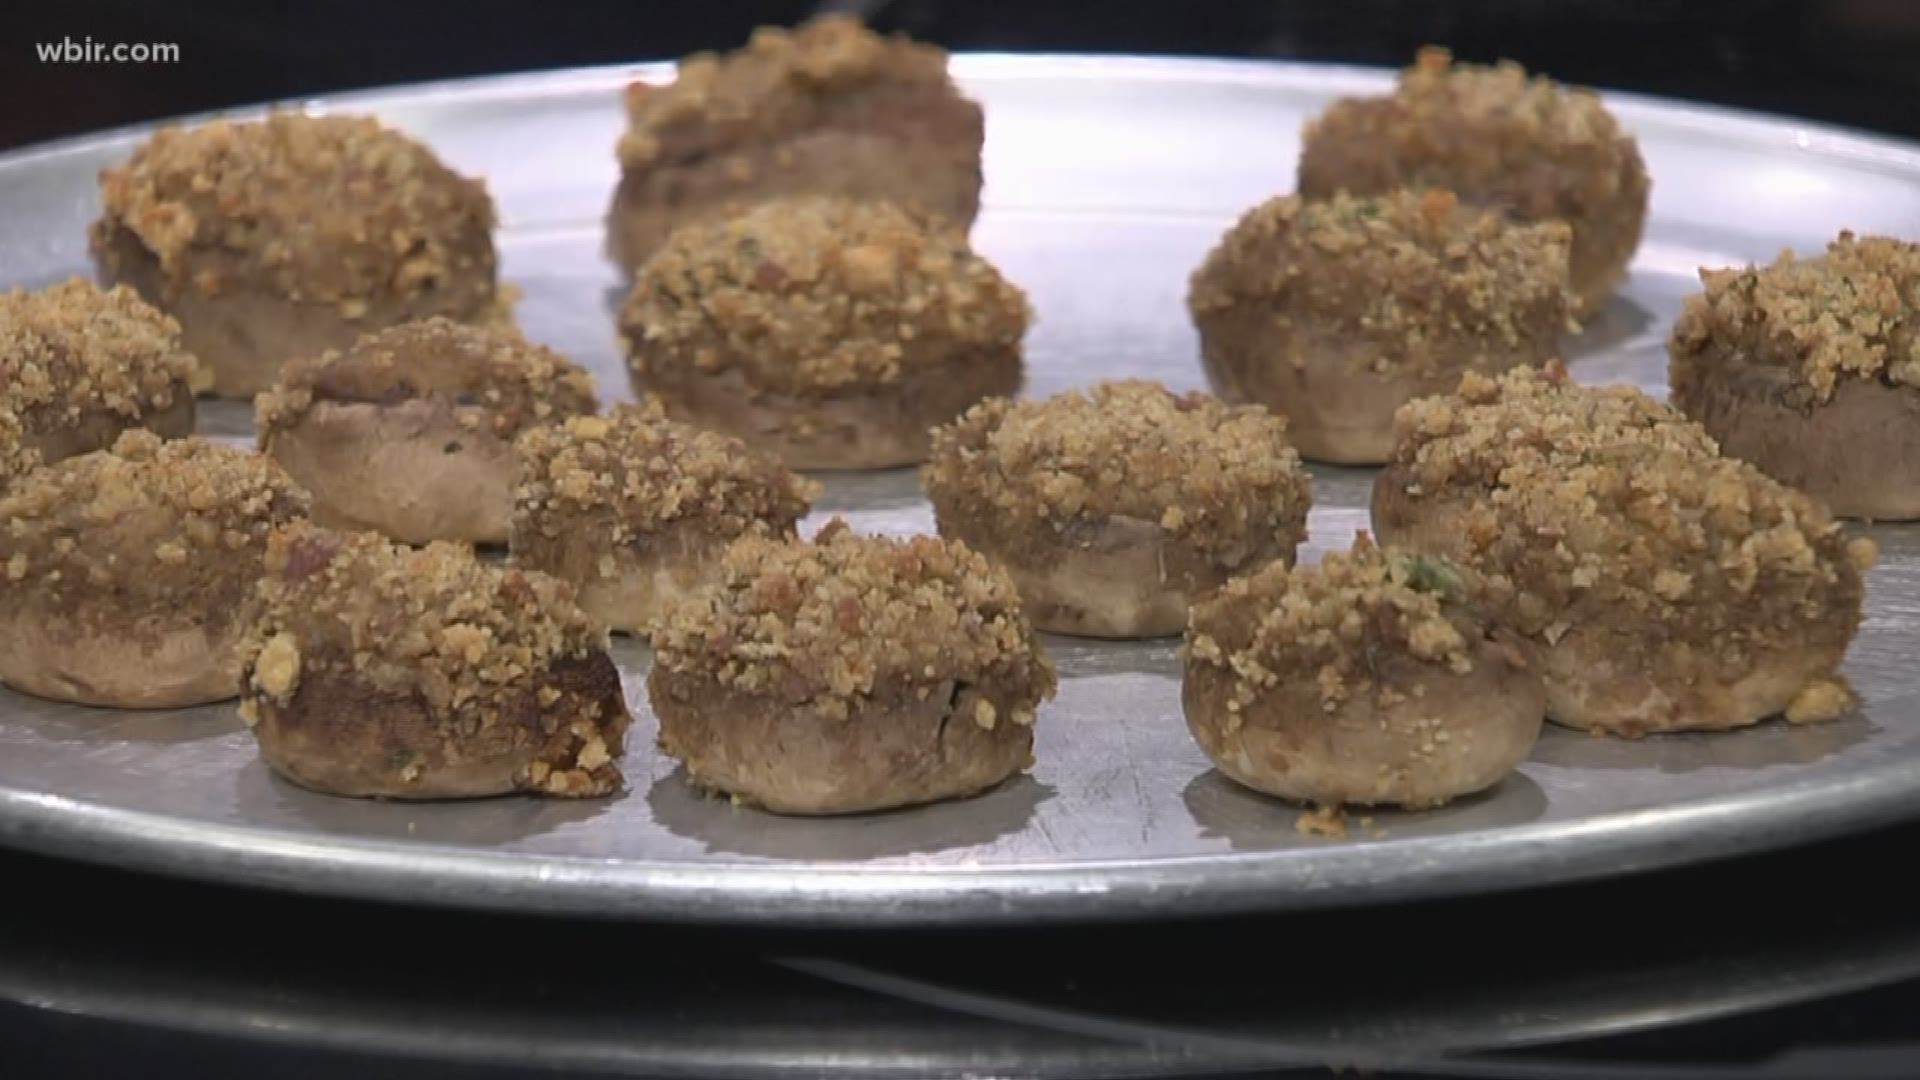 Jay with Metro Pizza is joined by his daughter Stella to make one of their favorite appetizers: Stuffed mushrooms. Metro Pizza is located at 1084 Hunters Crossing in Alcoa, Tennessee. Phone: (865) 982-2200, mmmetropizza.com.
July 18, 2 018-4pm